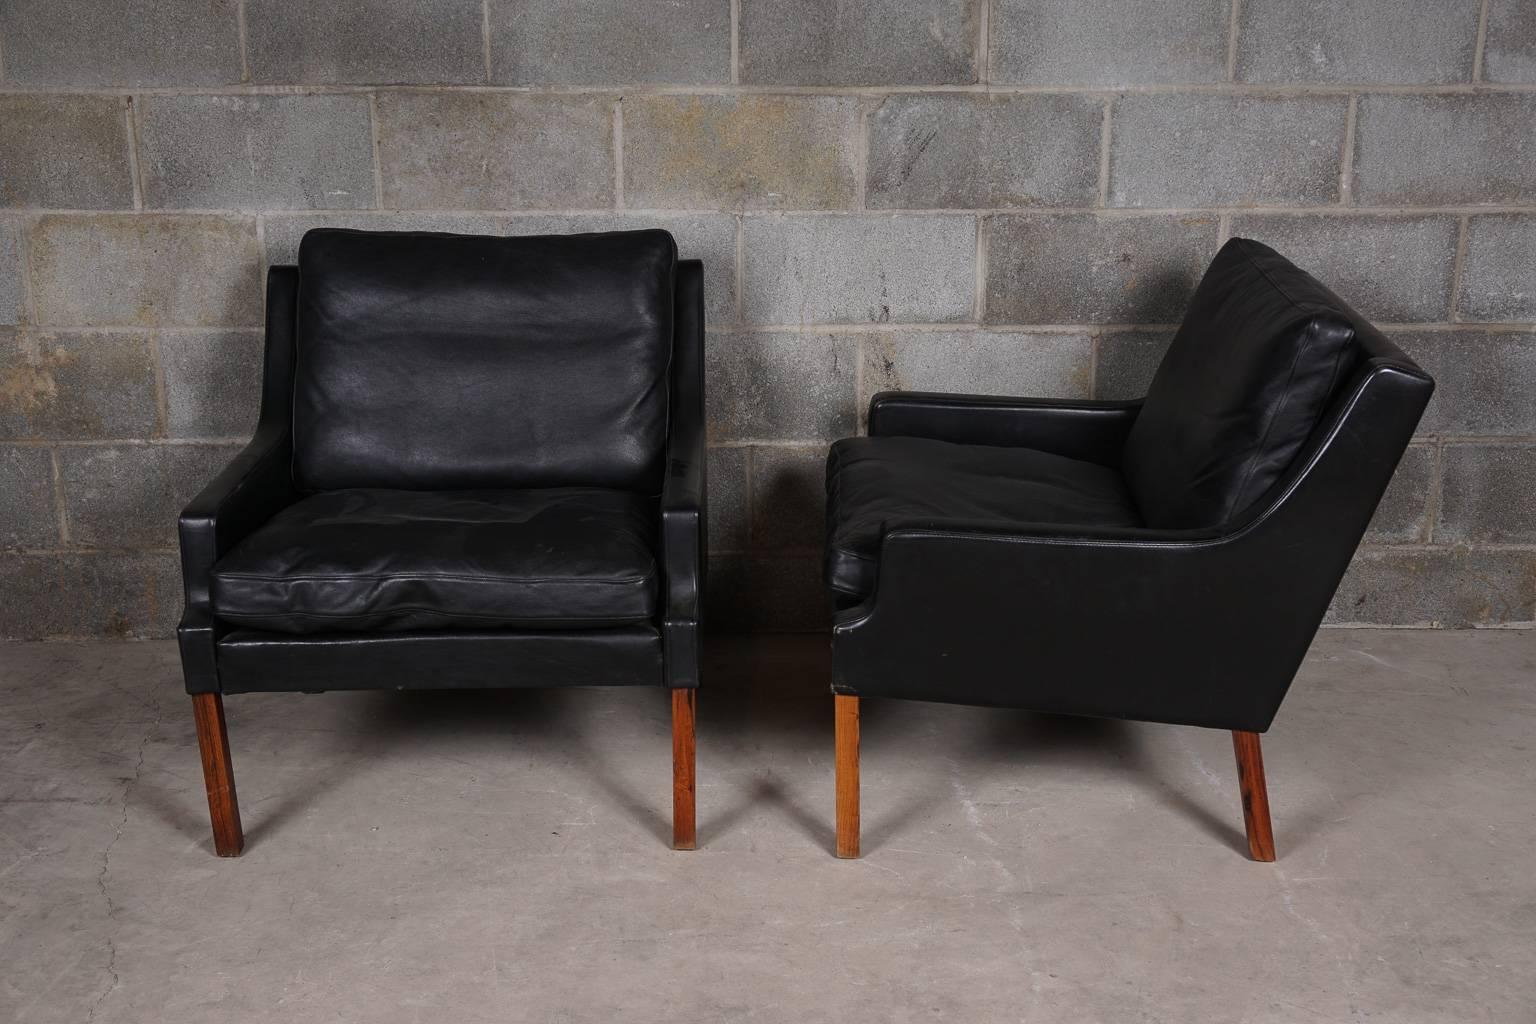 Pair of black leather chairs deigned by Rud Thygesen, manufactured by Vejan, Denmark.